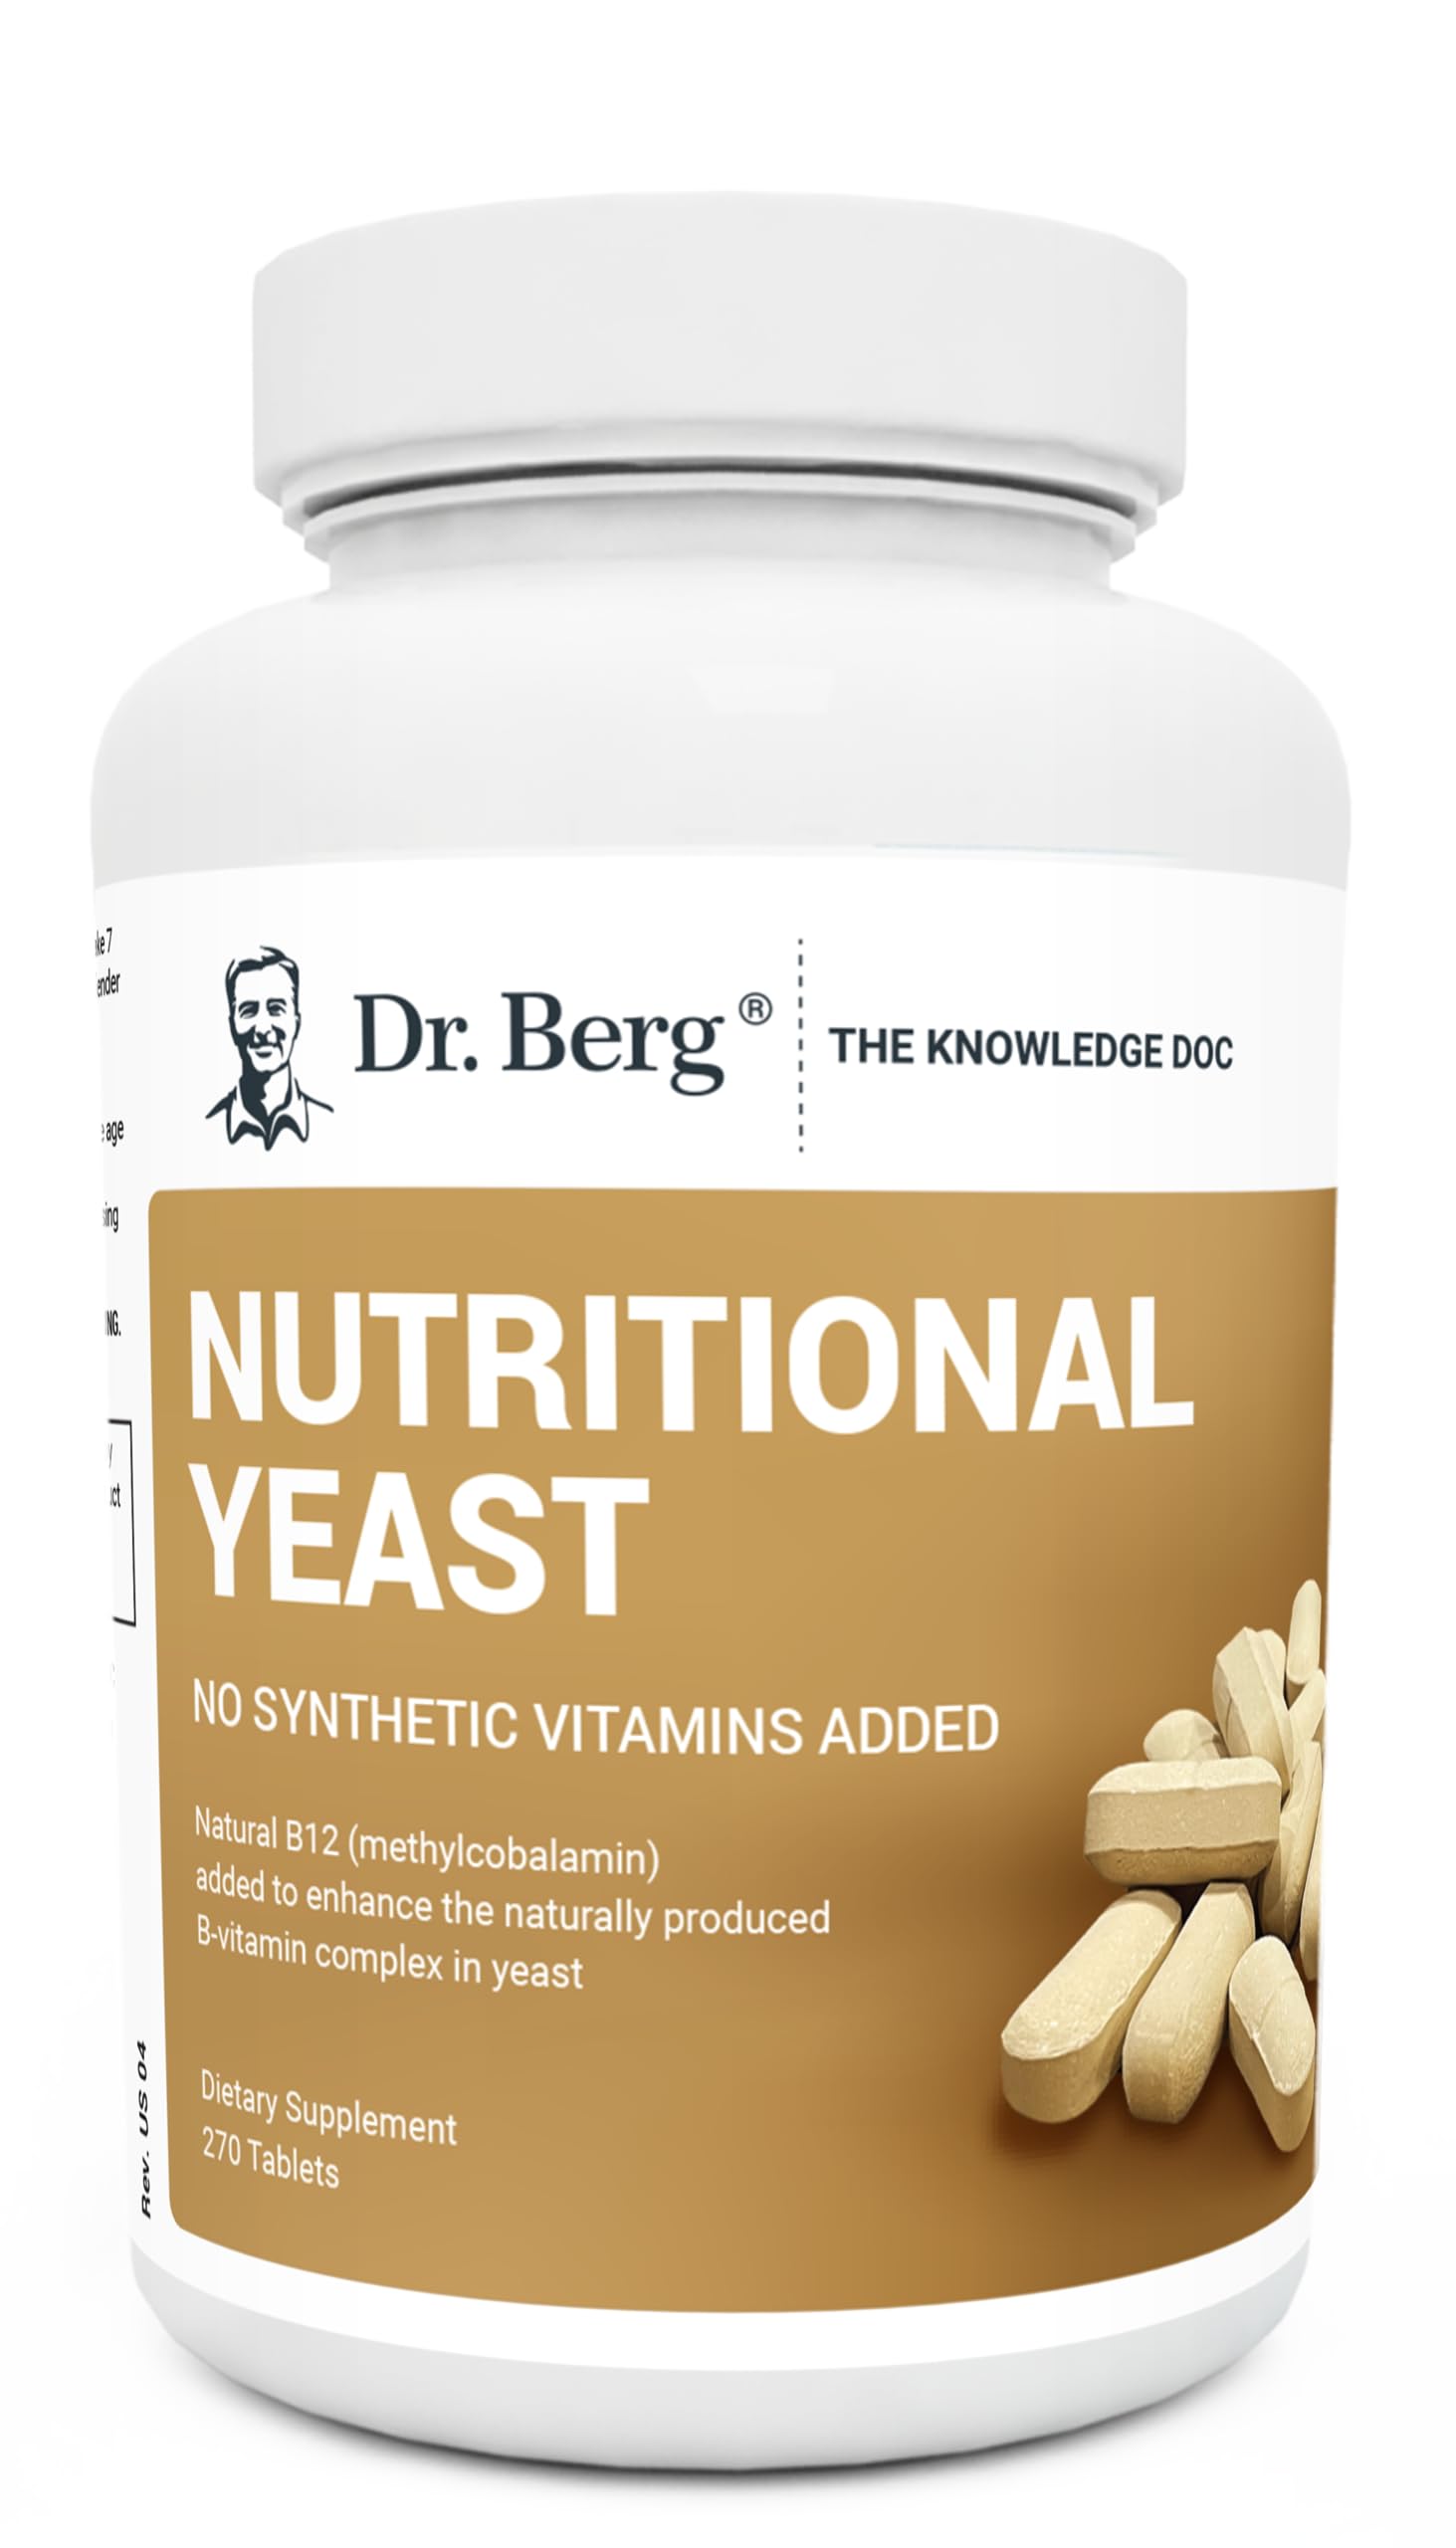 Dr. Berg's Nutritional Yeast